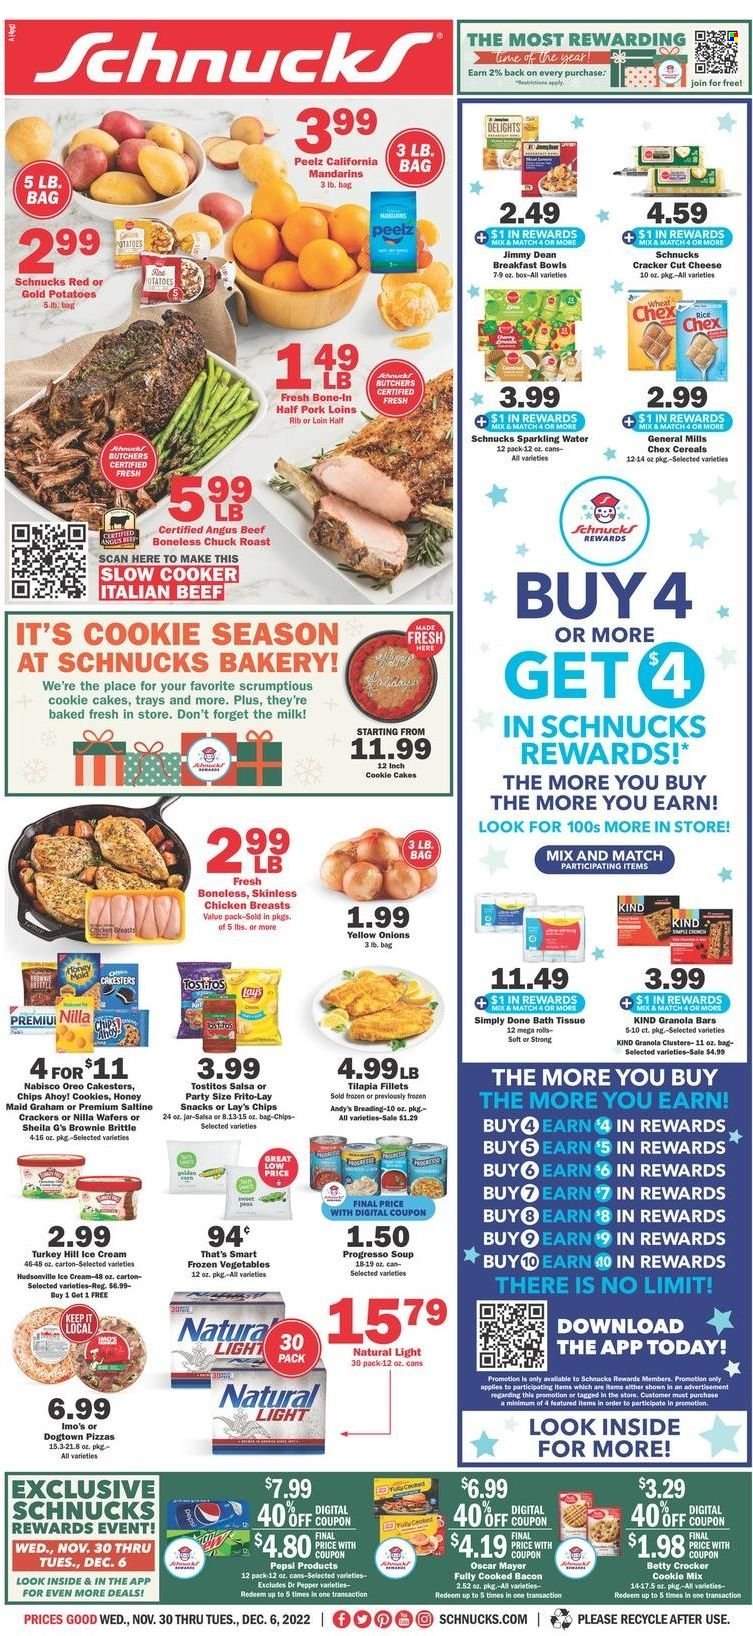 thumbnail - Schnucks Flyer - 11/30/2022 - 12/06/2022 - Sales products - cake, brownies, potatoes, mandarines, tilapia, pizza, breakfast bowl, Progresso, Jimmy Dean, bacon, Oscar Mayer, cheese, Oreo, milk, ice cream, frozen vegetables, wafers, snack, crackers, Chips Ahoy!, Lay’s, Frito-Lay, Tostitos, Chex Mix, cereals, granola bar, Honey Maid, rice, salsa, Pepsi, Dr. Pepper, sparkling water, chicken breasts, beef meat, chuck roast, bath tissue. Page 1.